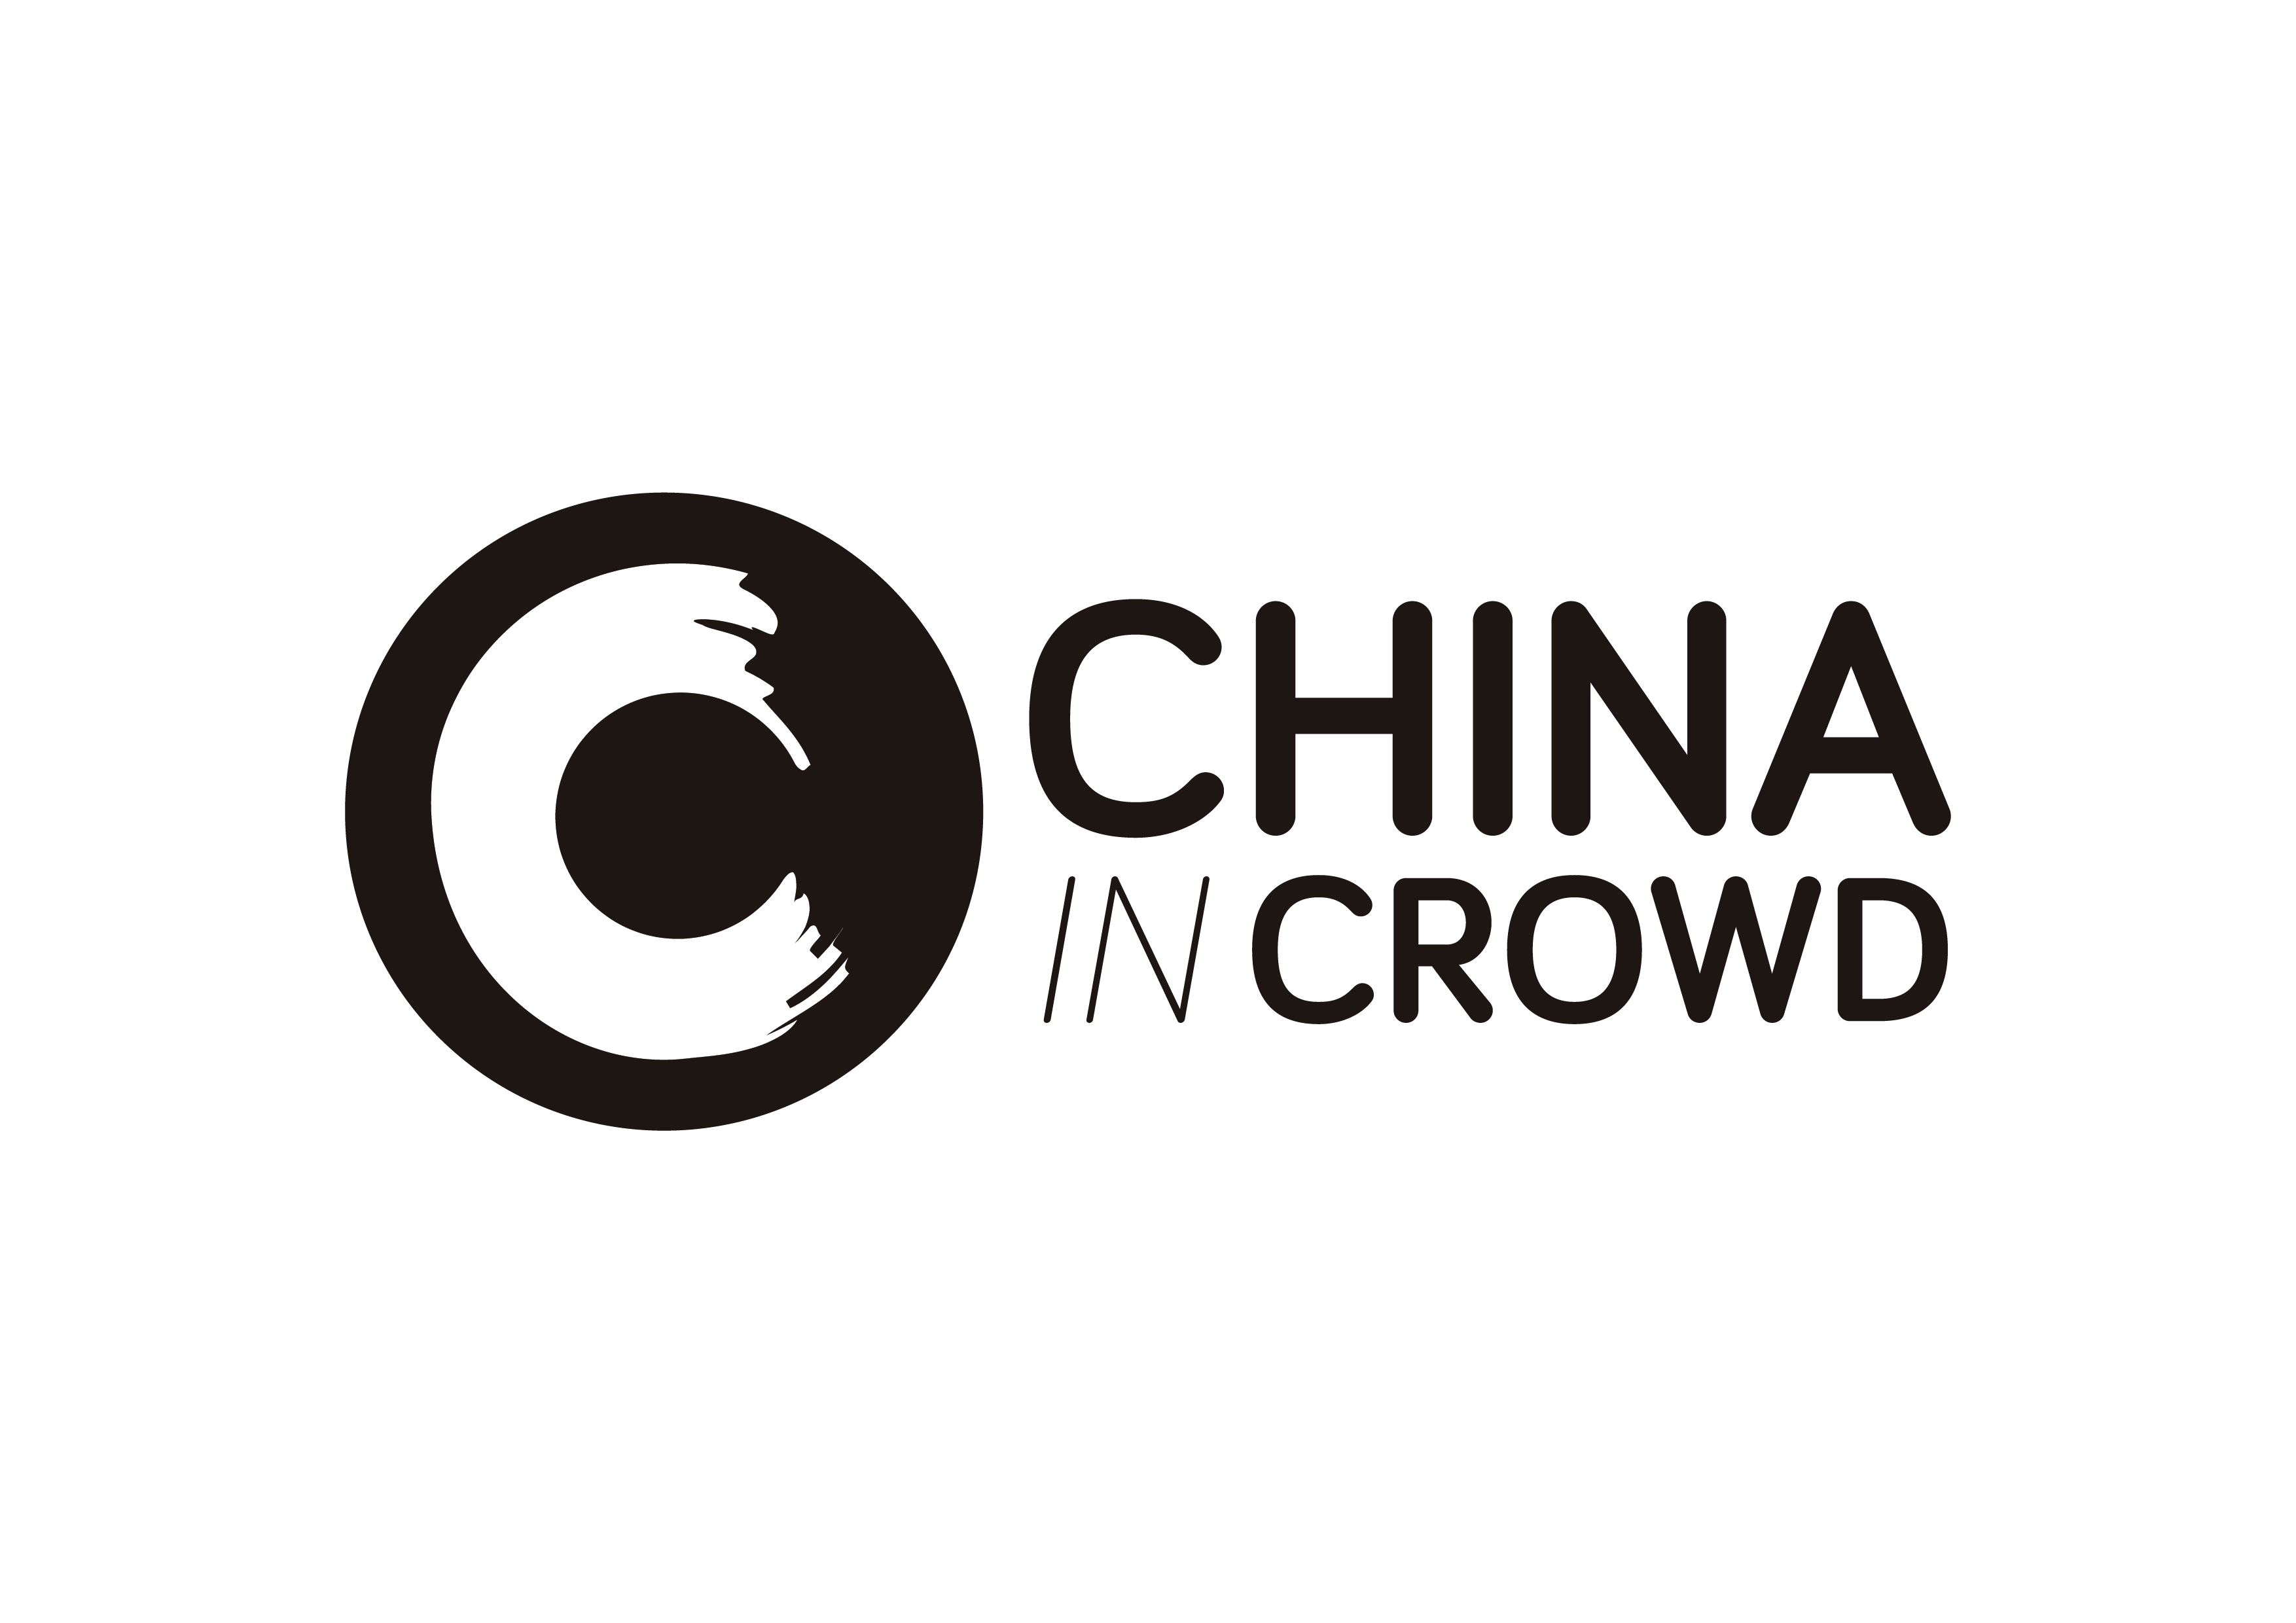 CHINA IN CROWD